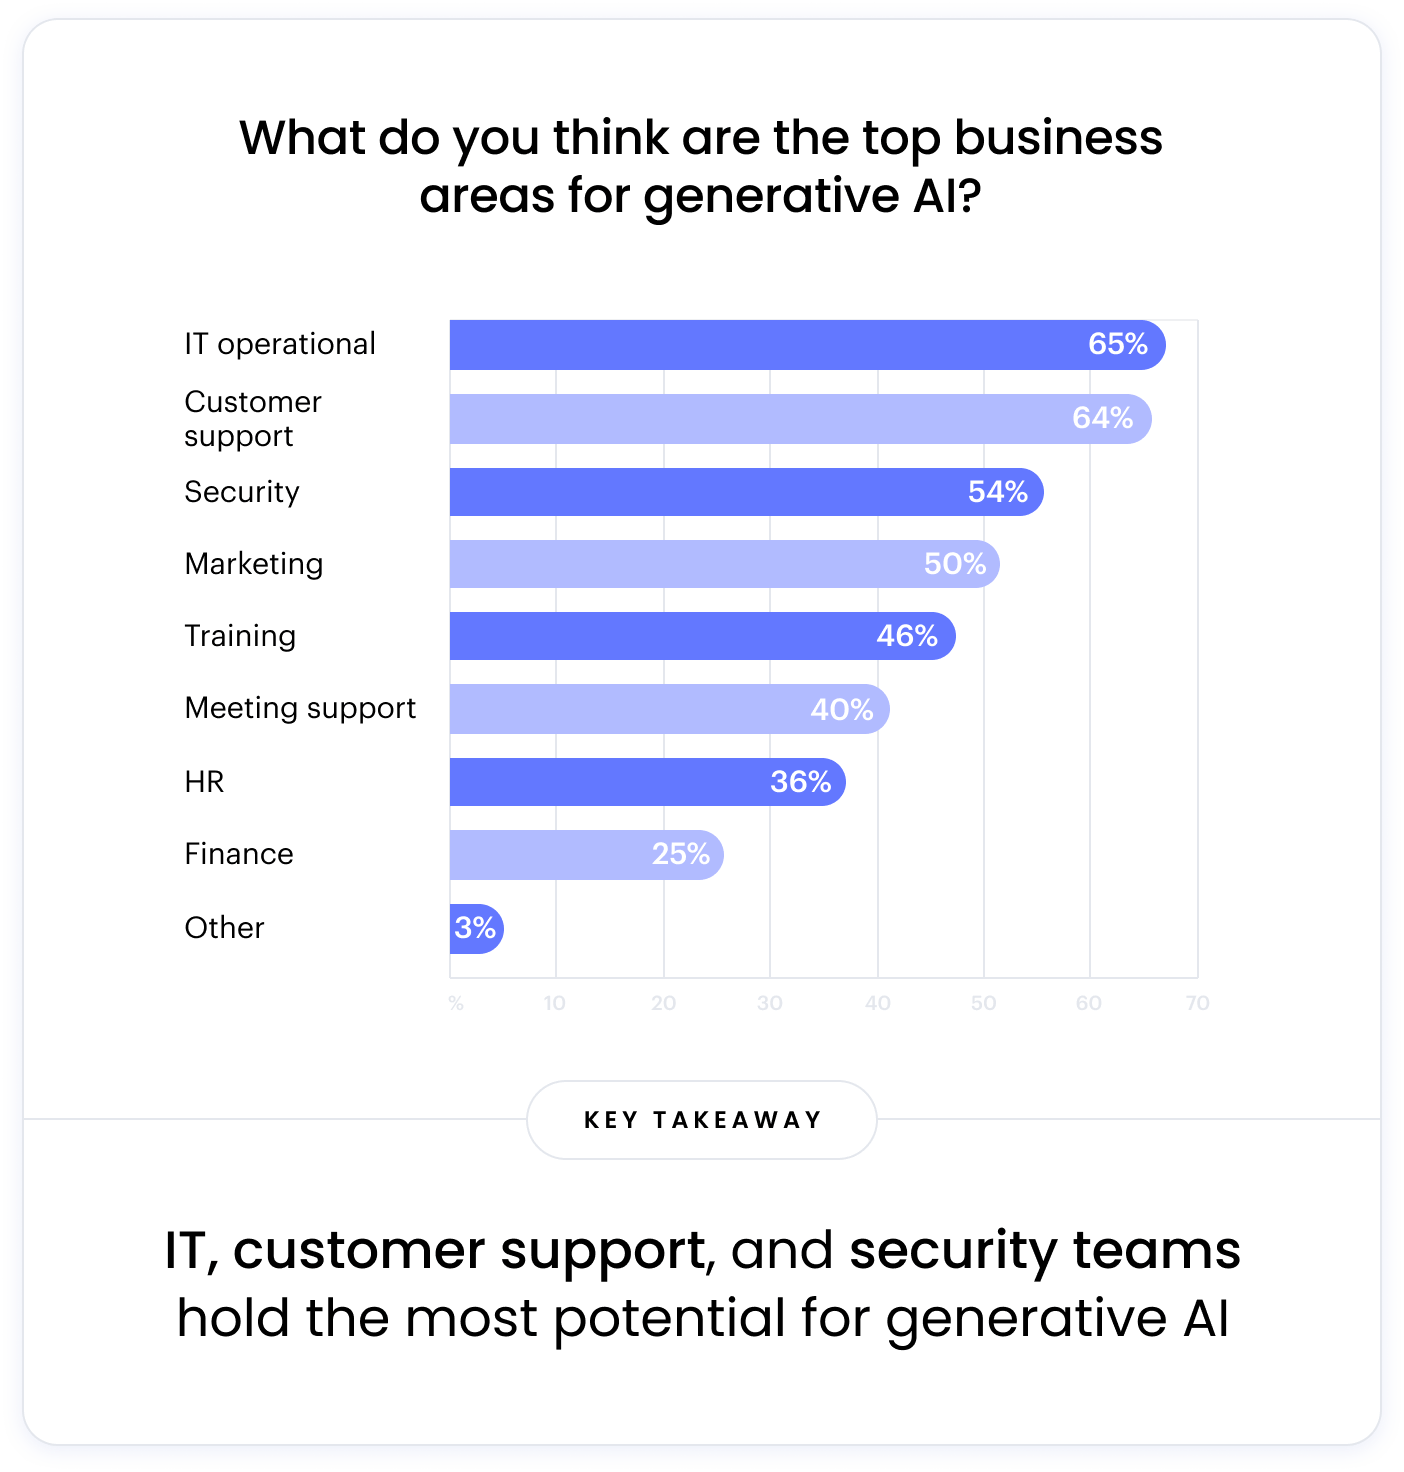 The image displays a bar chart of the leading business areas for generative AI. The x-axis represents the percentage of respondents, while the y-axis lists the business areas. The most prominent applications are IT operational (65%), customer support (64%), and security (54%). Other notable areas include marketing (50%), training (46%), meeting support (40%), HR (36%), finance (25%), and other (3%).